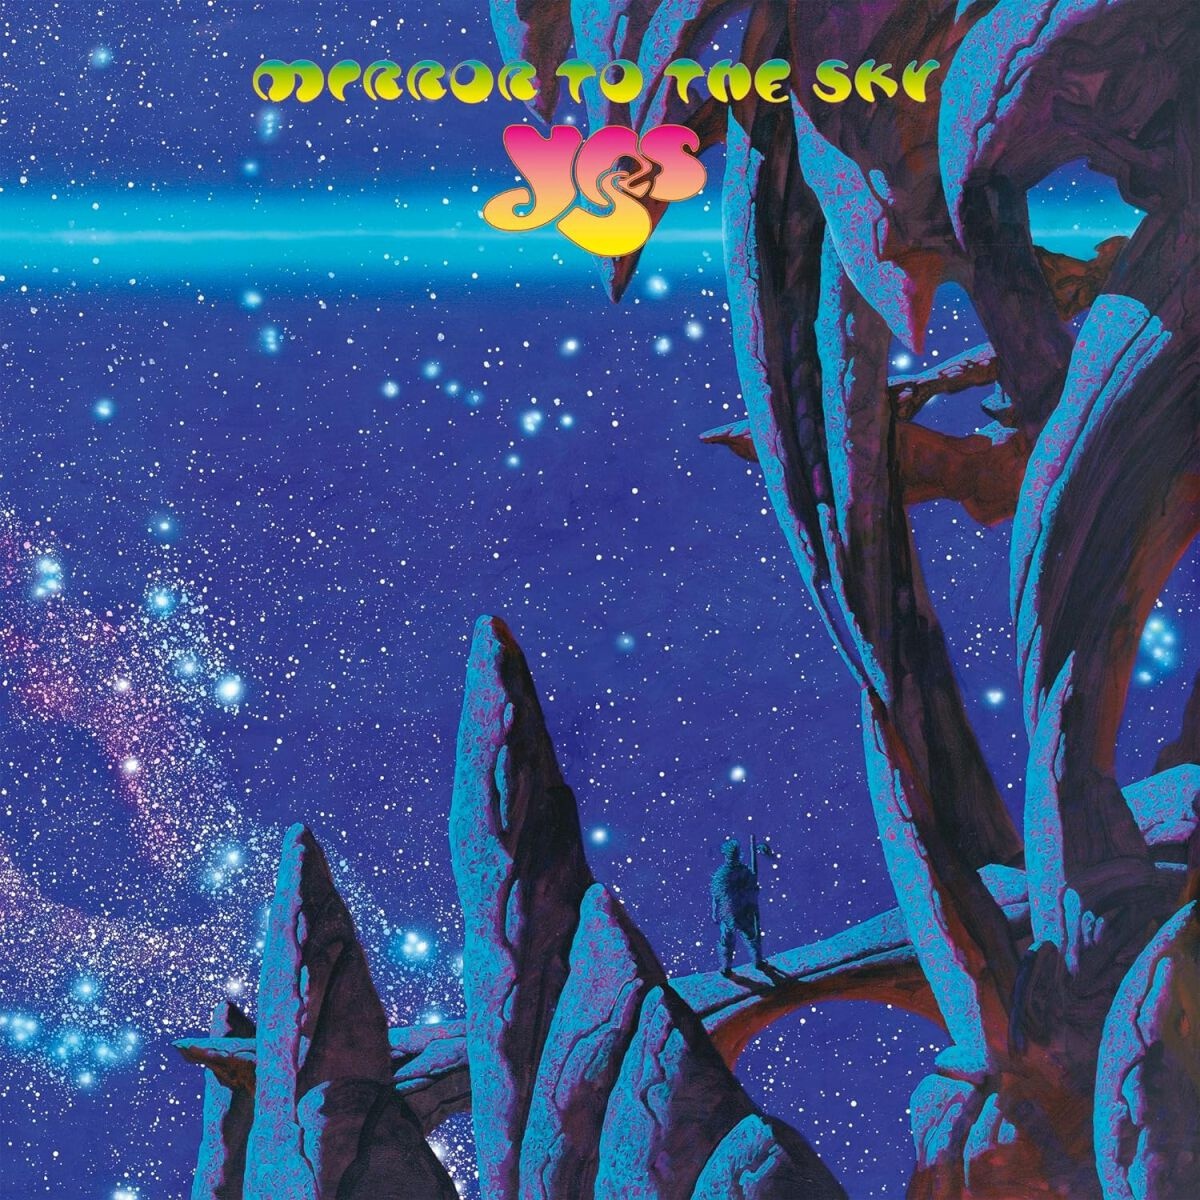 Mirror to the sky von Yes - 2-CD & Blu-ray (Digipak, Limited Edition, Re-Release)